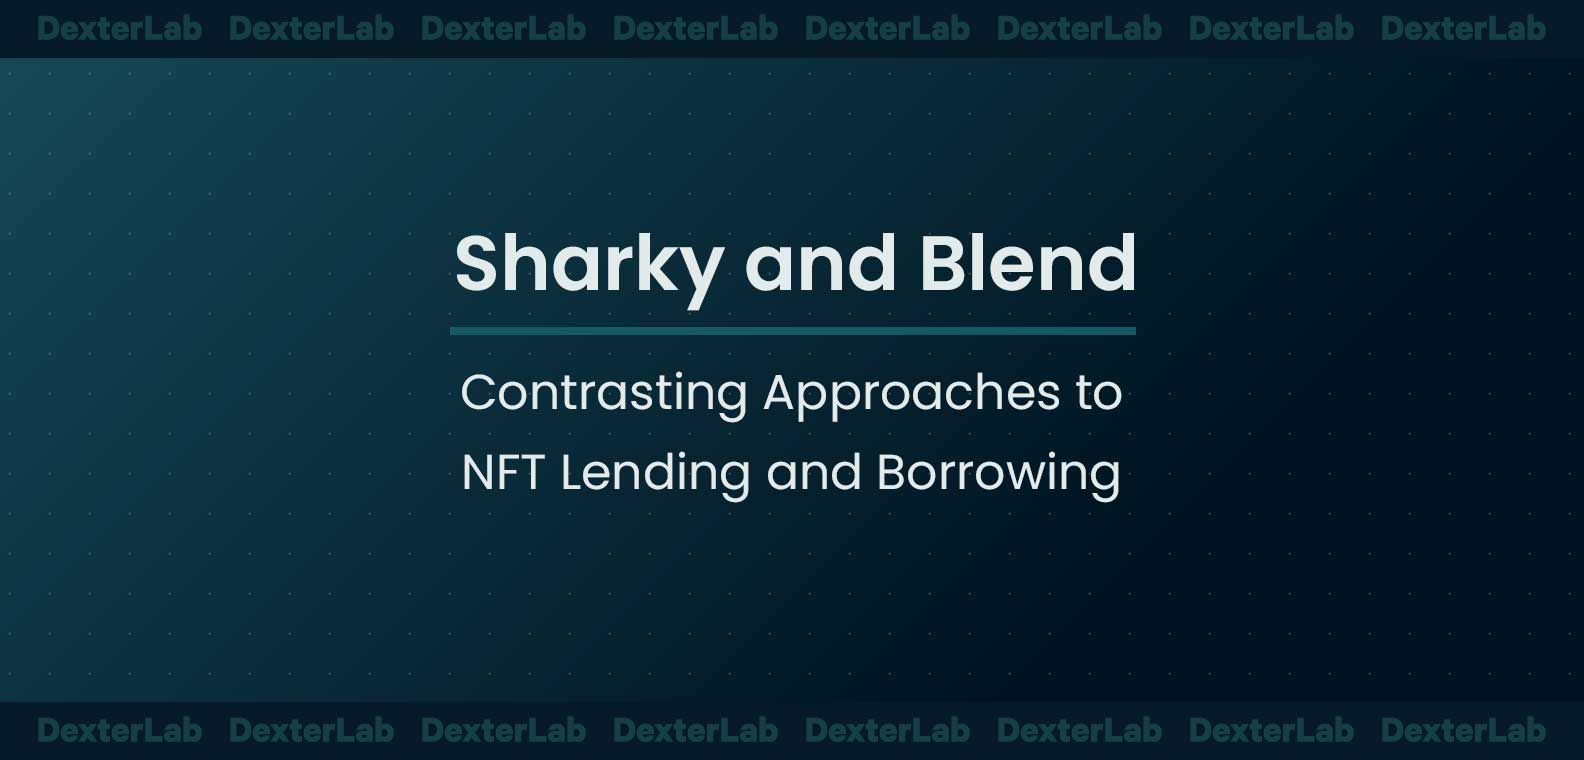 Sharky and Blend: Contrasting Approaches to NFT Lending and Borrowing